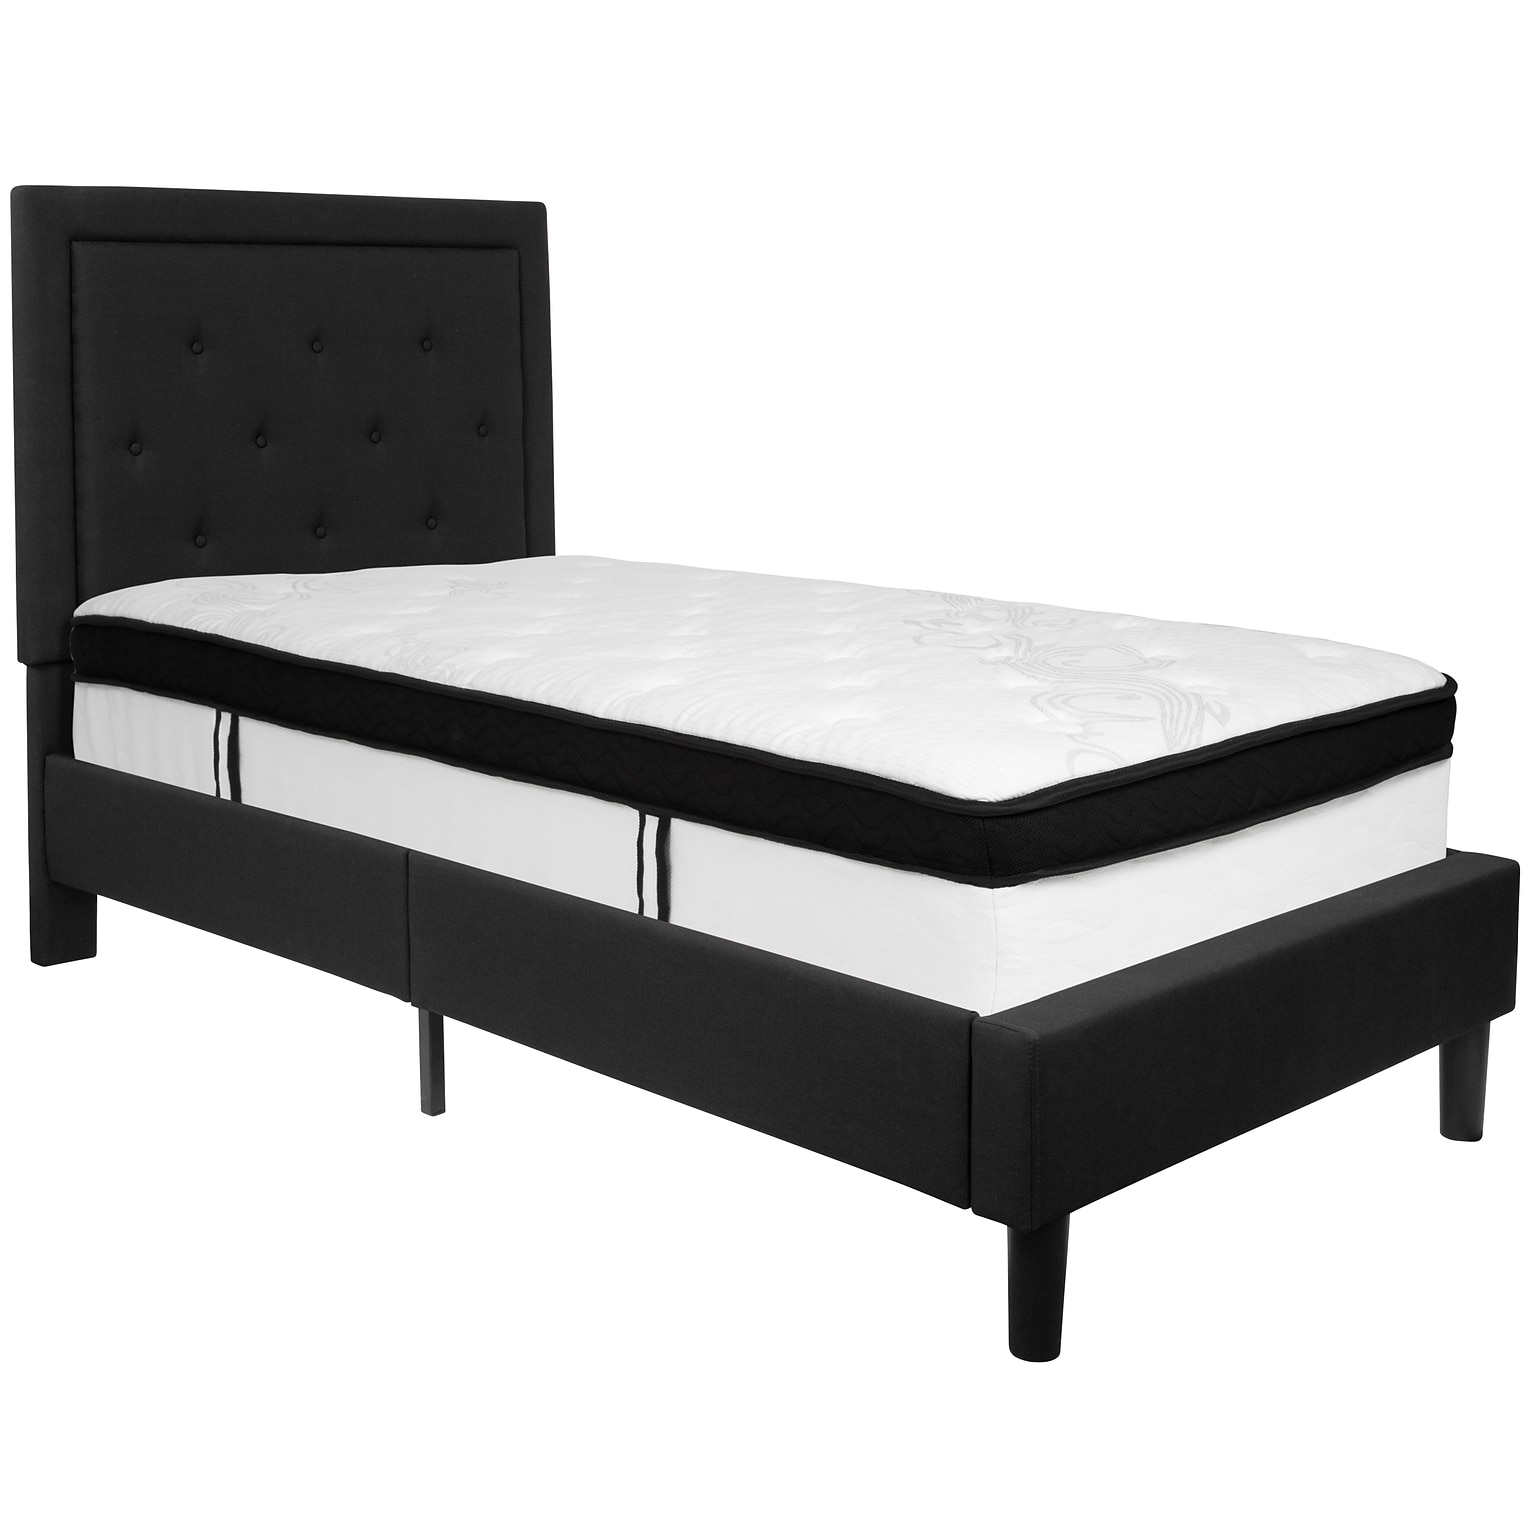 Flash Furniture Roxbury Tufted Upholstered Platform Bed in Black Fabric with Memory Foam Mattress, Twin (SLBMF21)